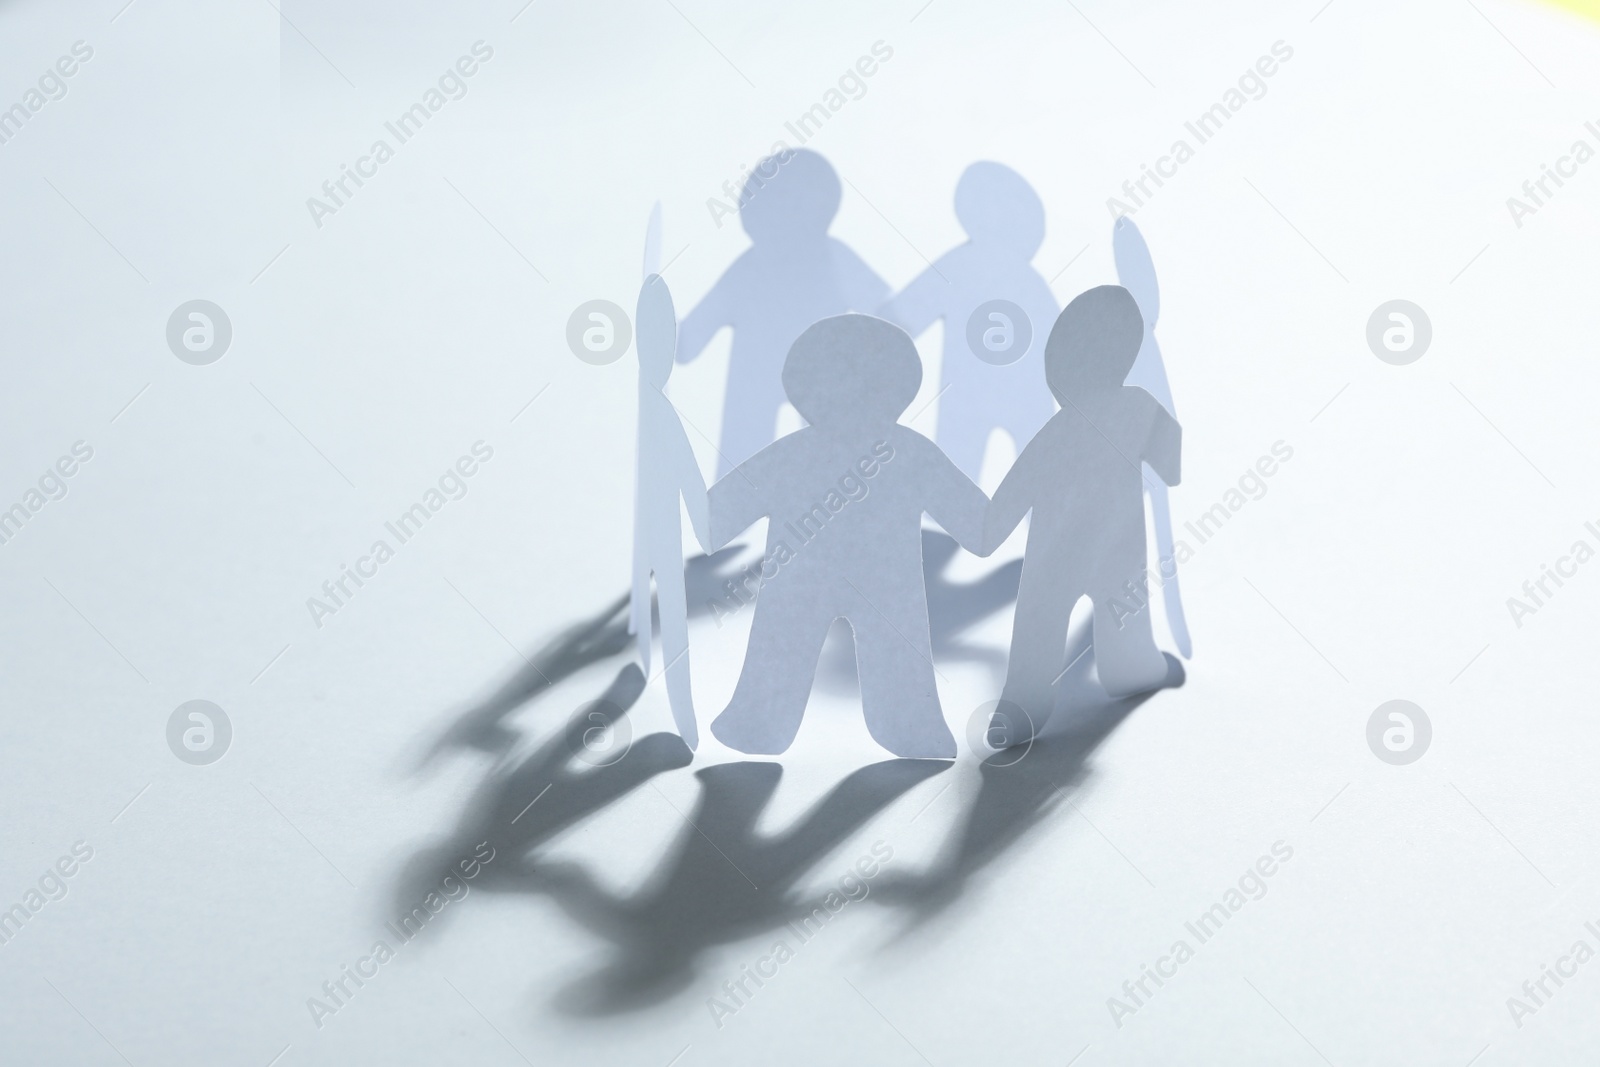 Photo of Paper people chain making circle on white background. Unity concept